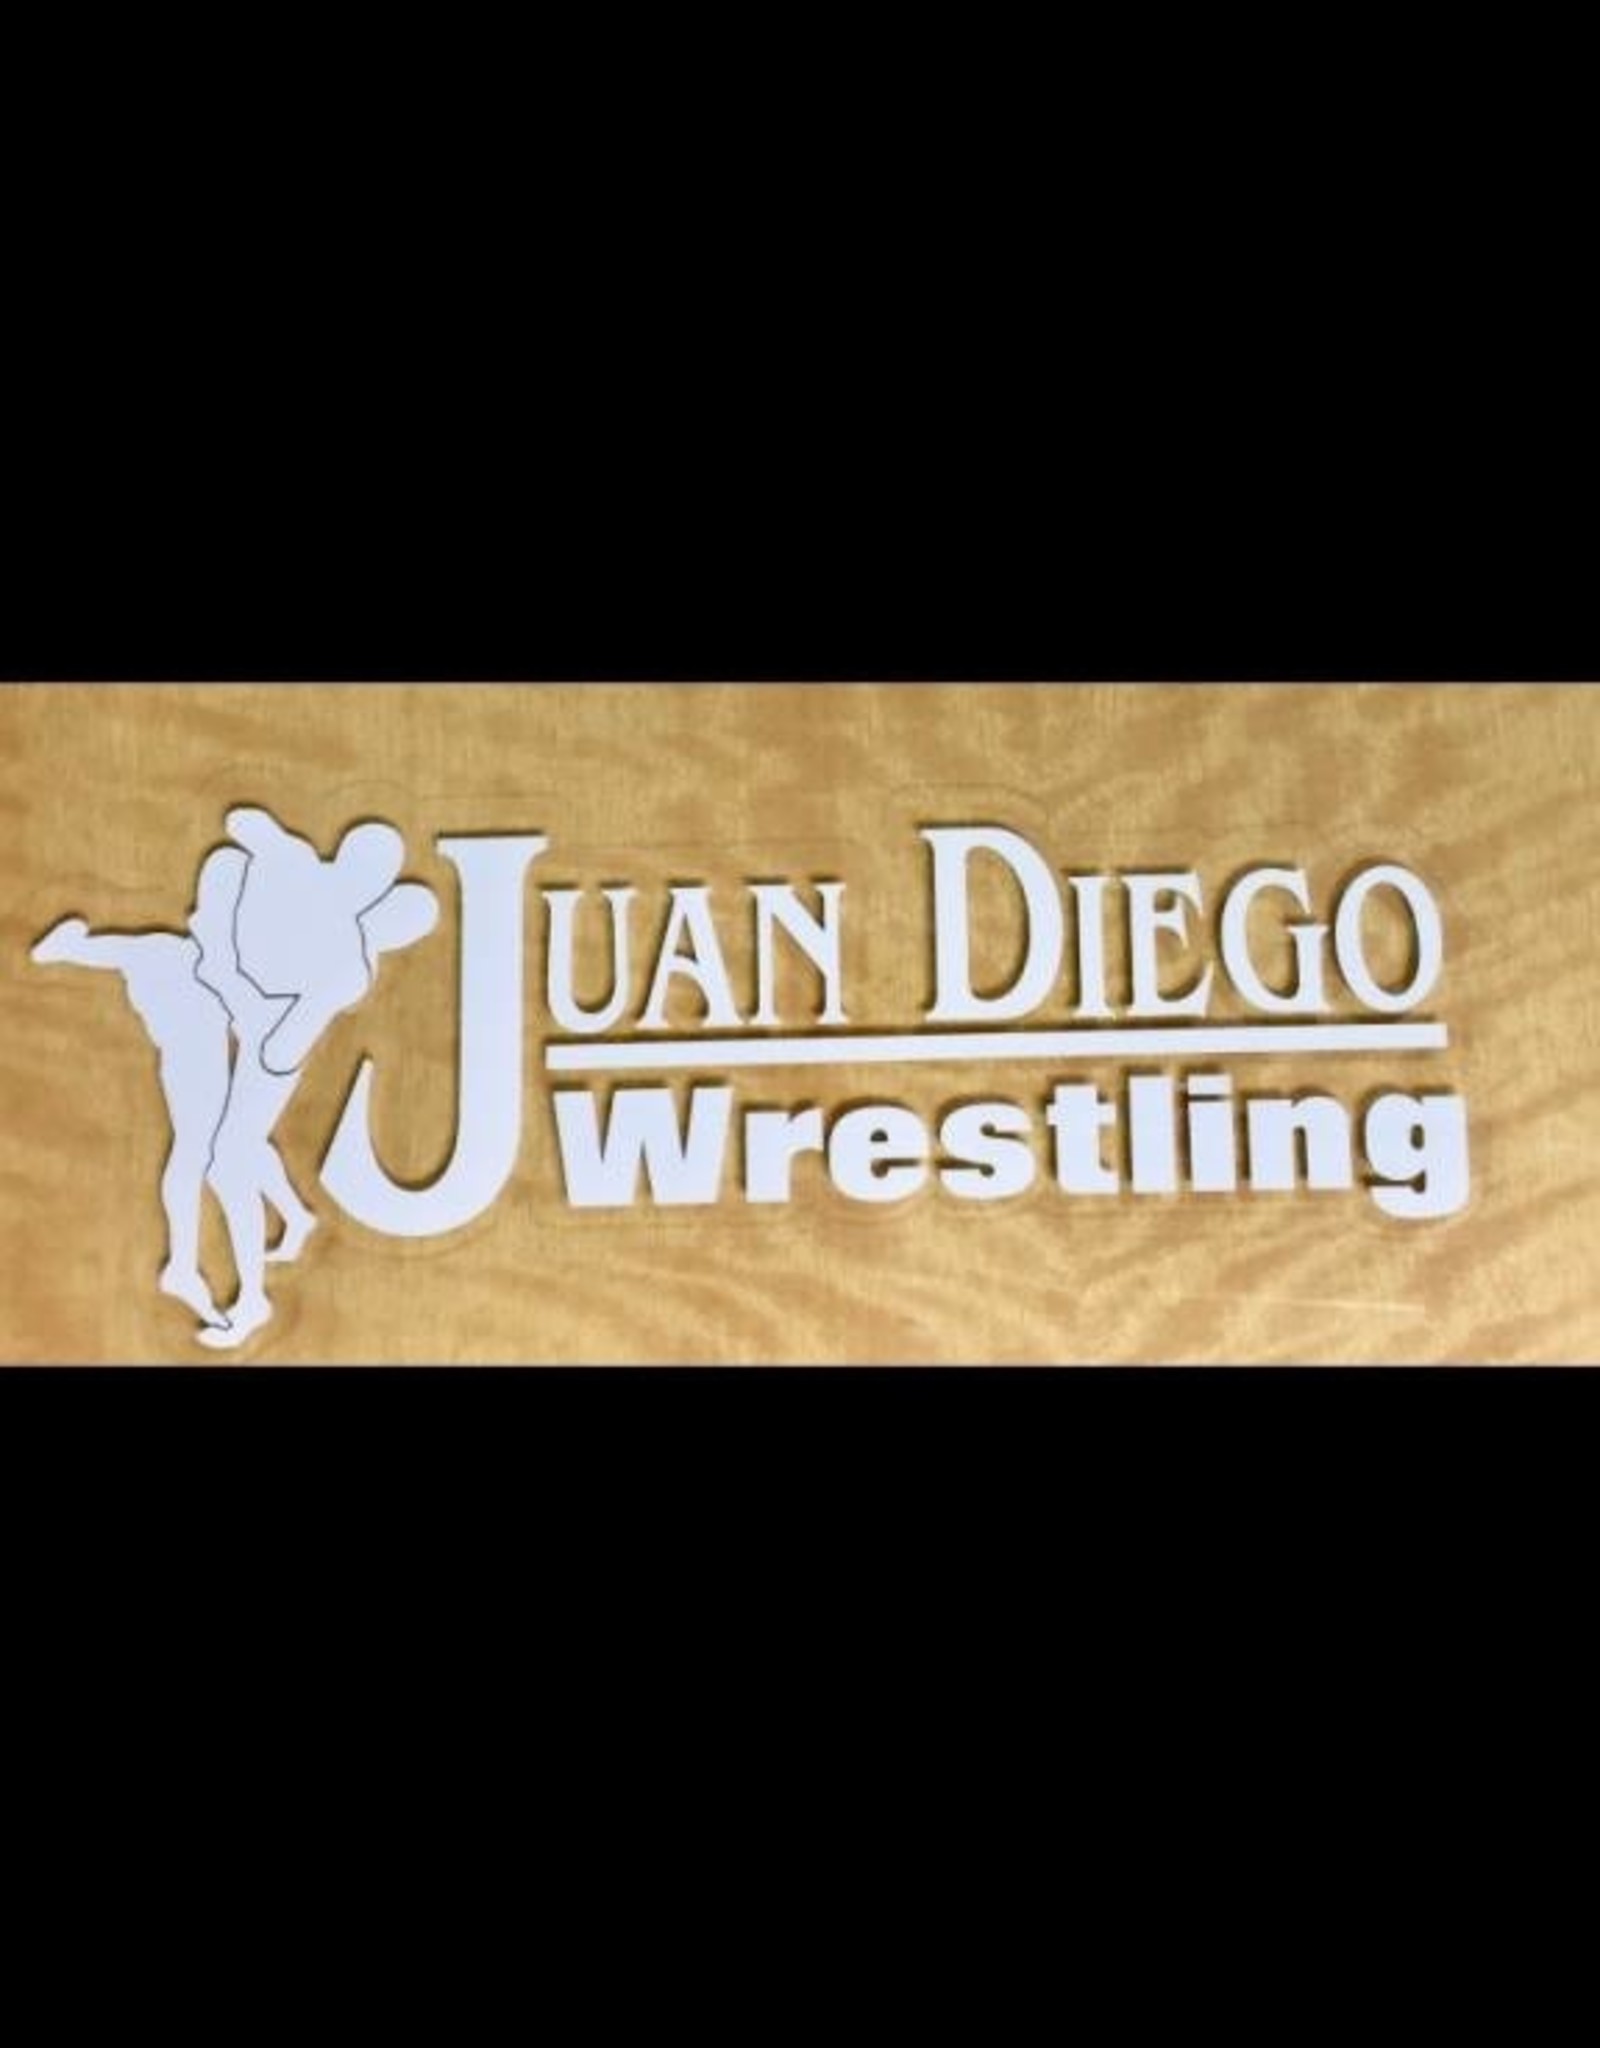 NON-UNIFORM Wrestling- Decal, clearance, sold as is